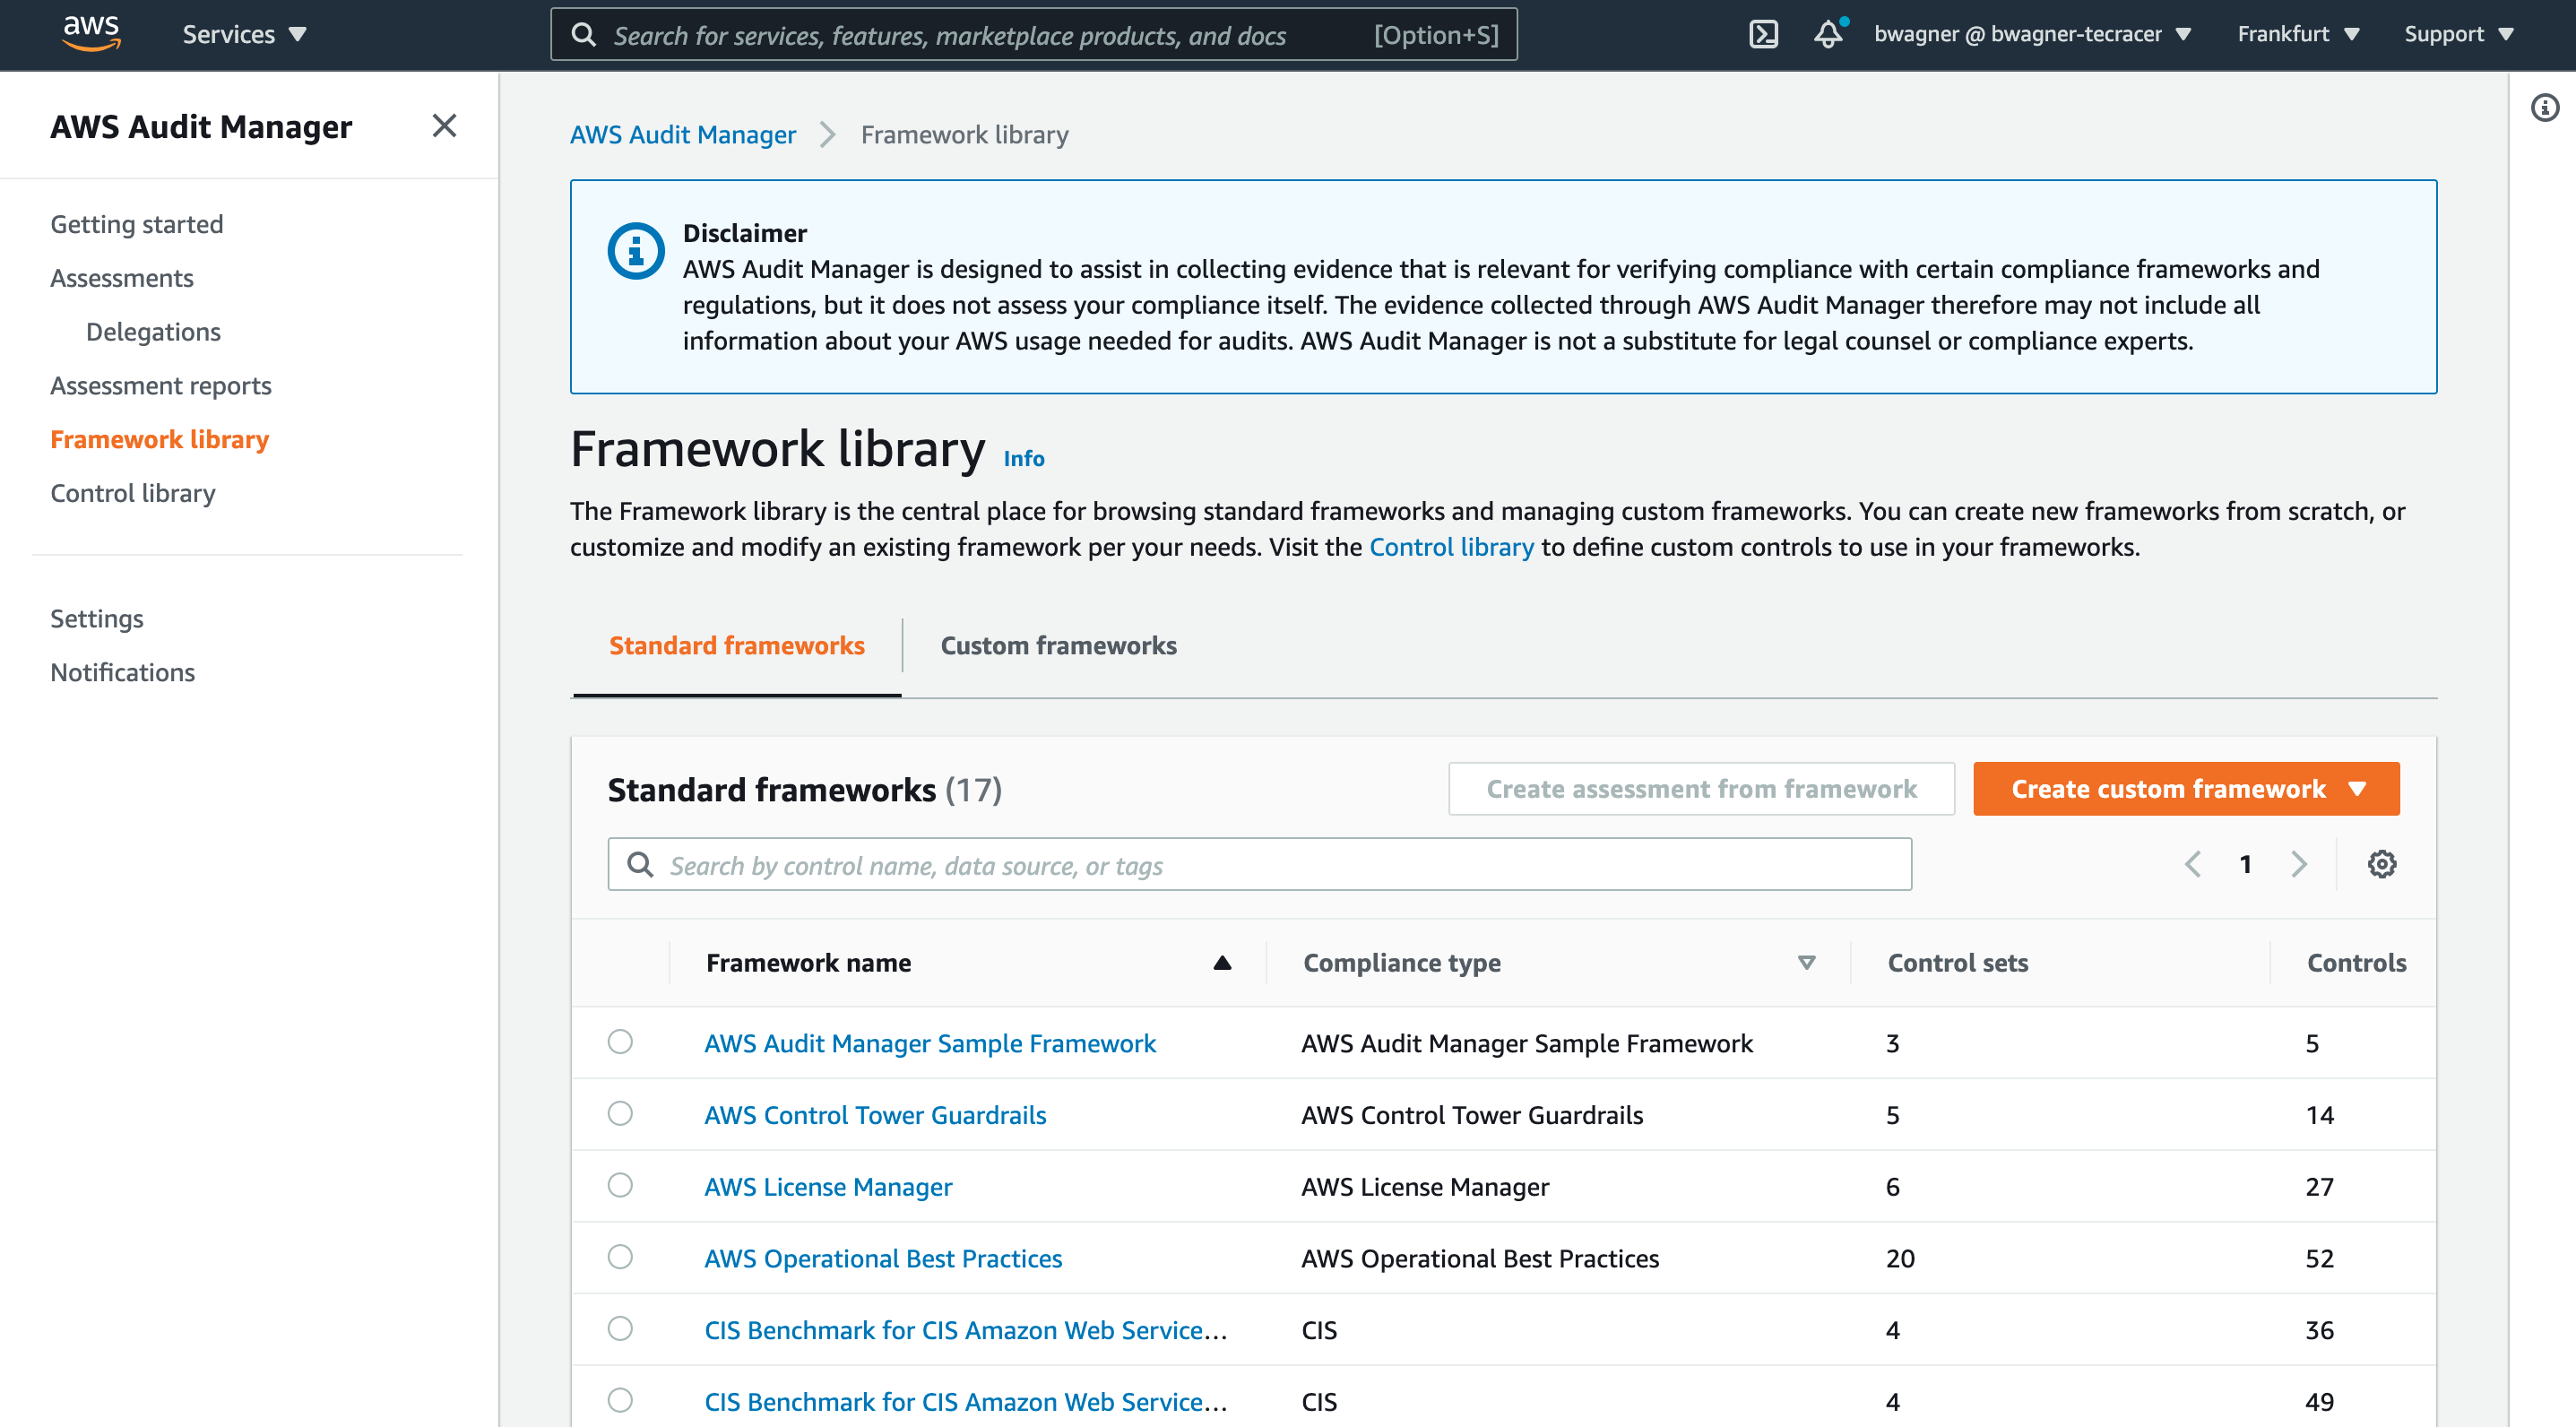 AWS Audit Manager&rsquo;s built-in framework library